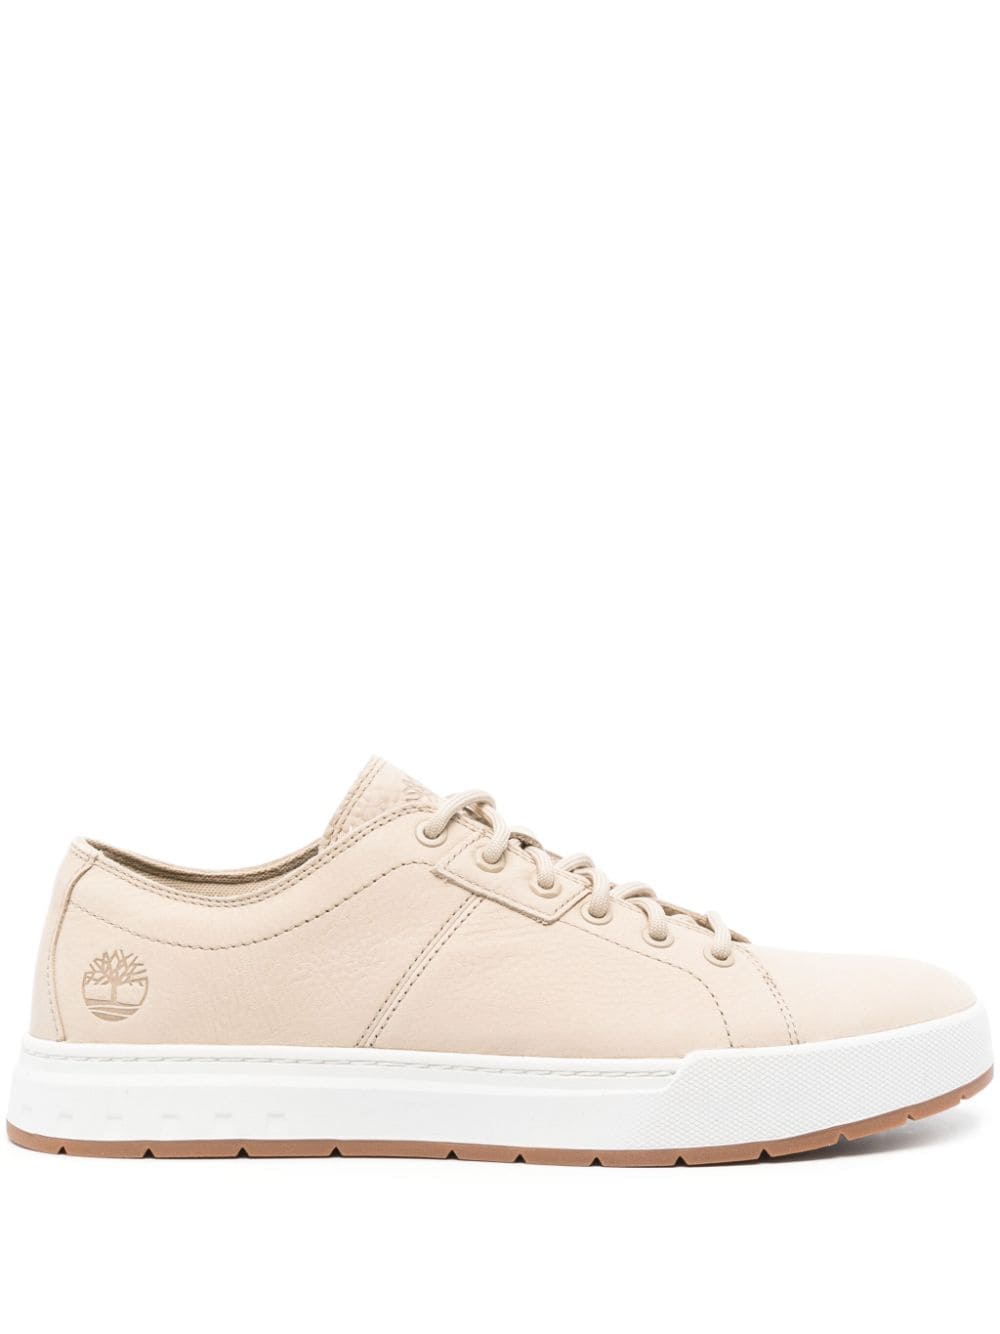 Timberland logo-debossed leather sneakers - Neutrals von Timberland